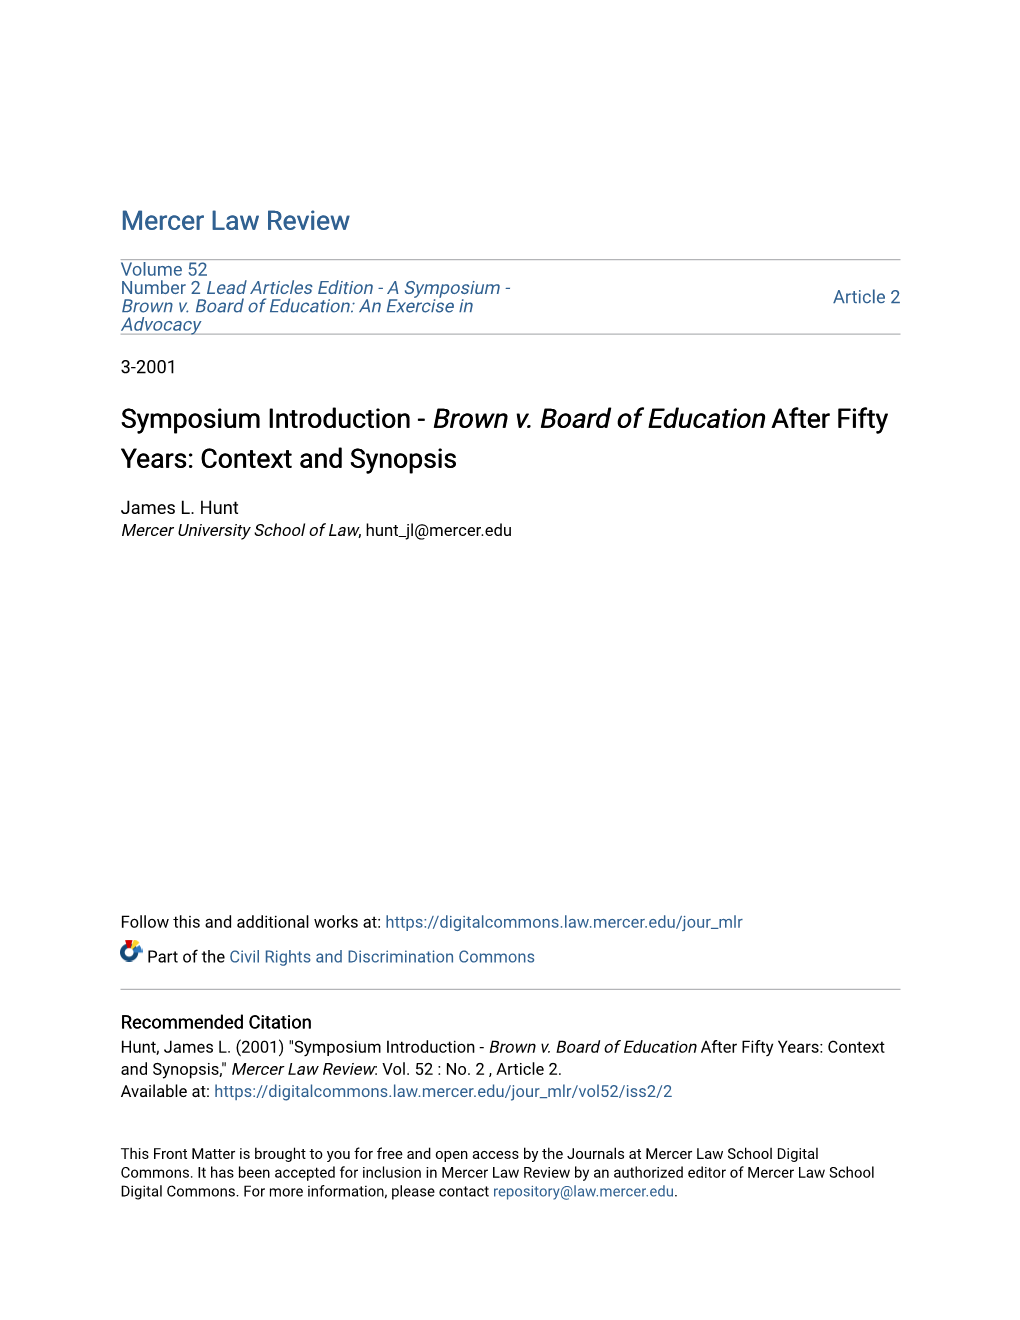 Brown V. Board of Education After Fifty Years: Context and Synopsis